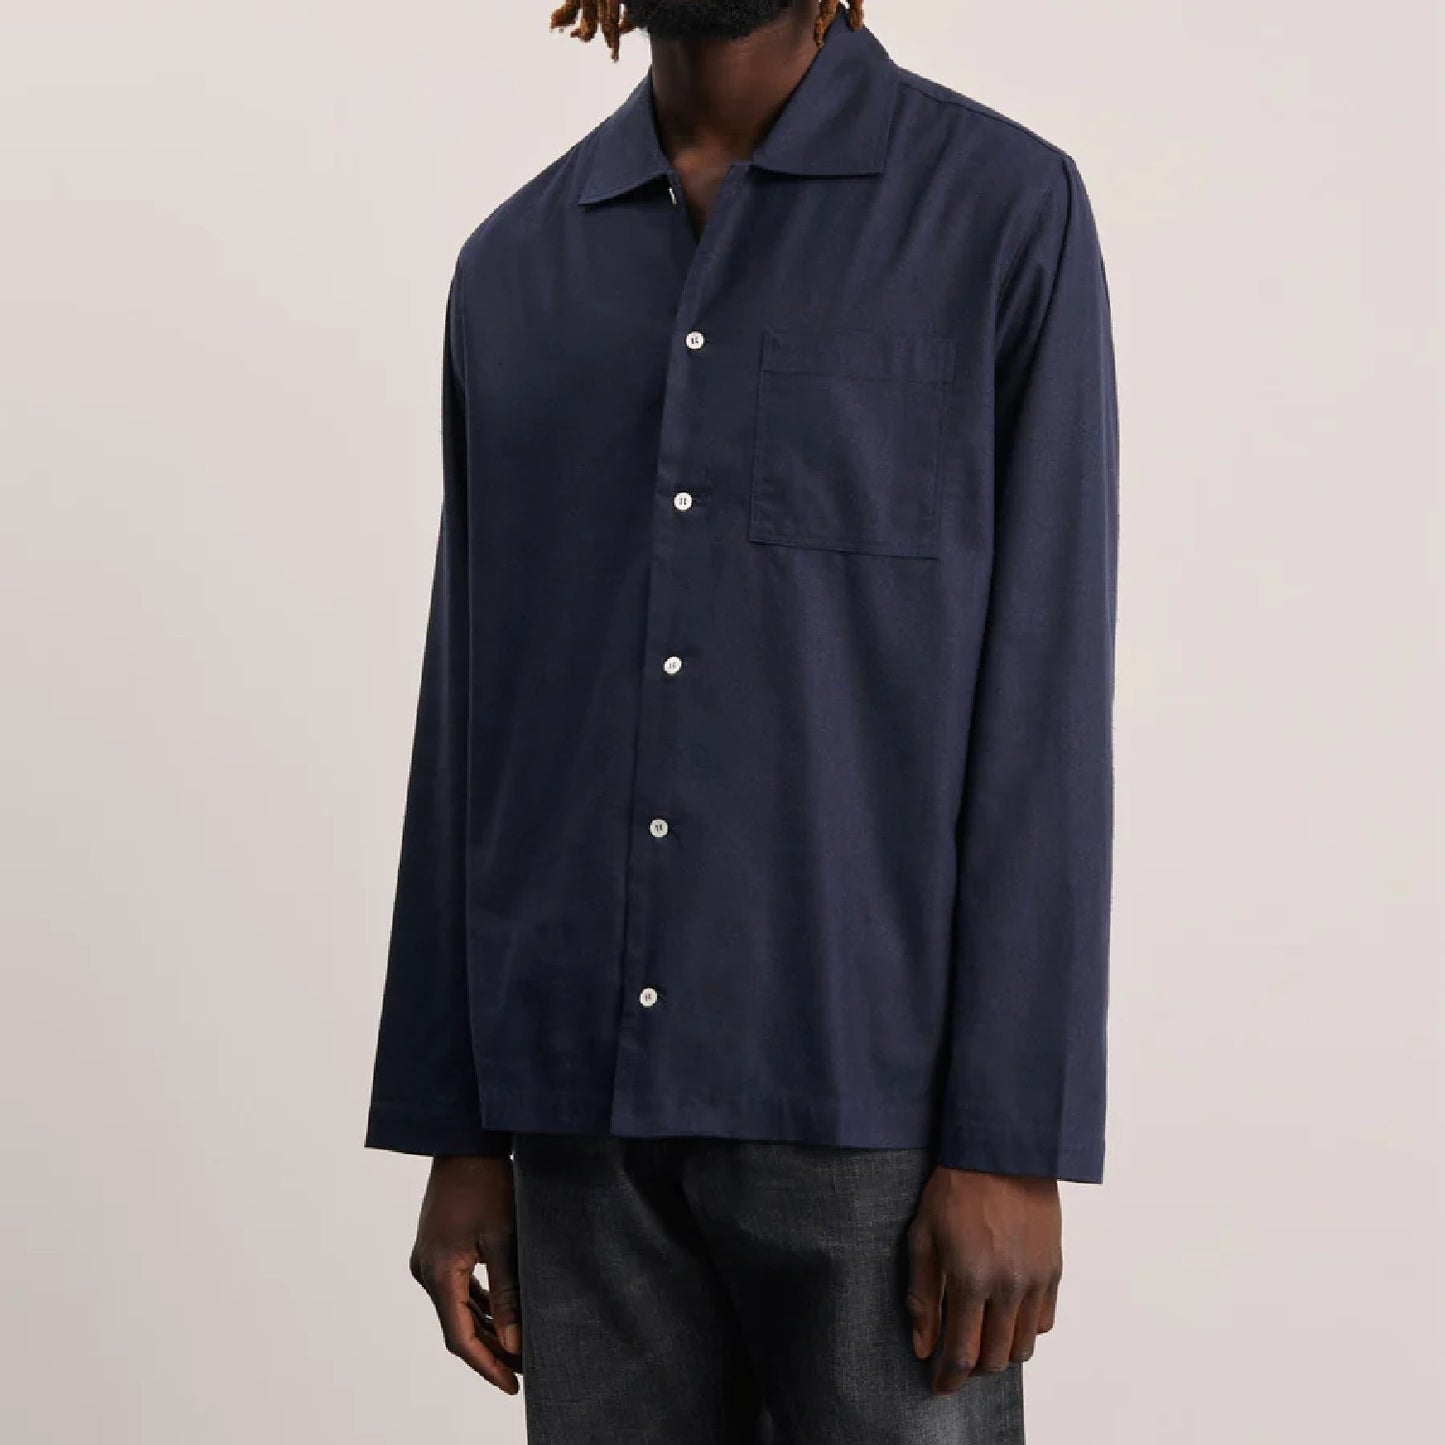 Another Aspect Another Shirt 2.1 - Night Sky Navy